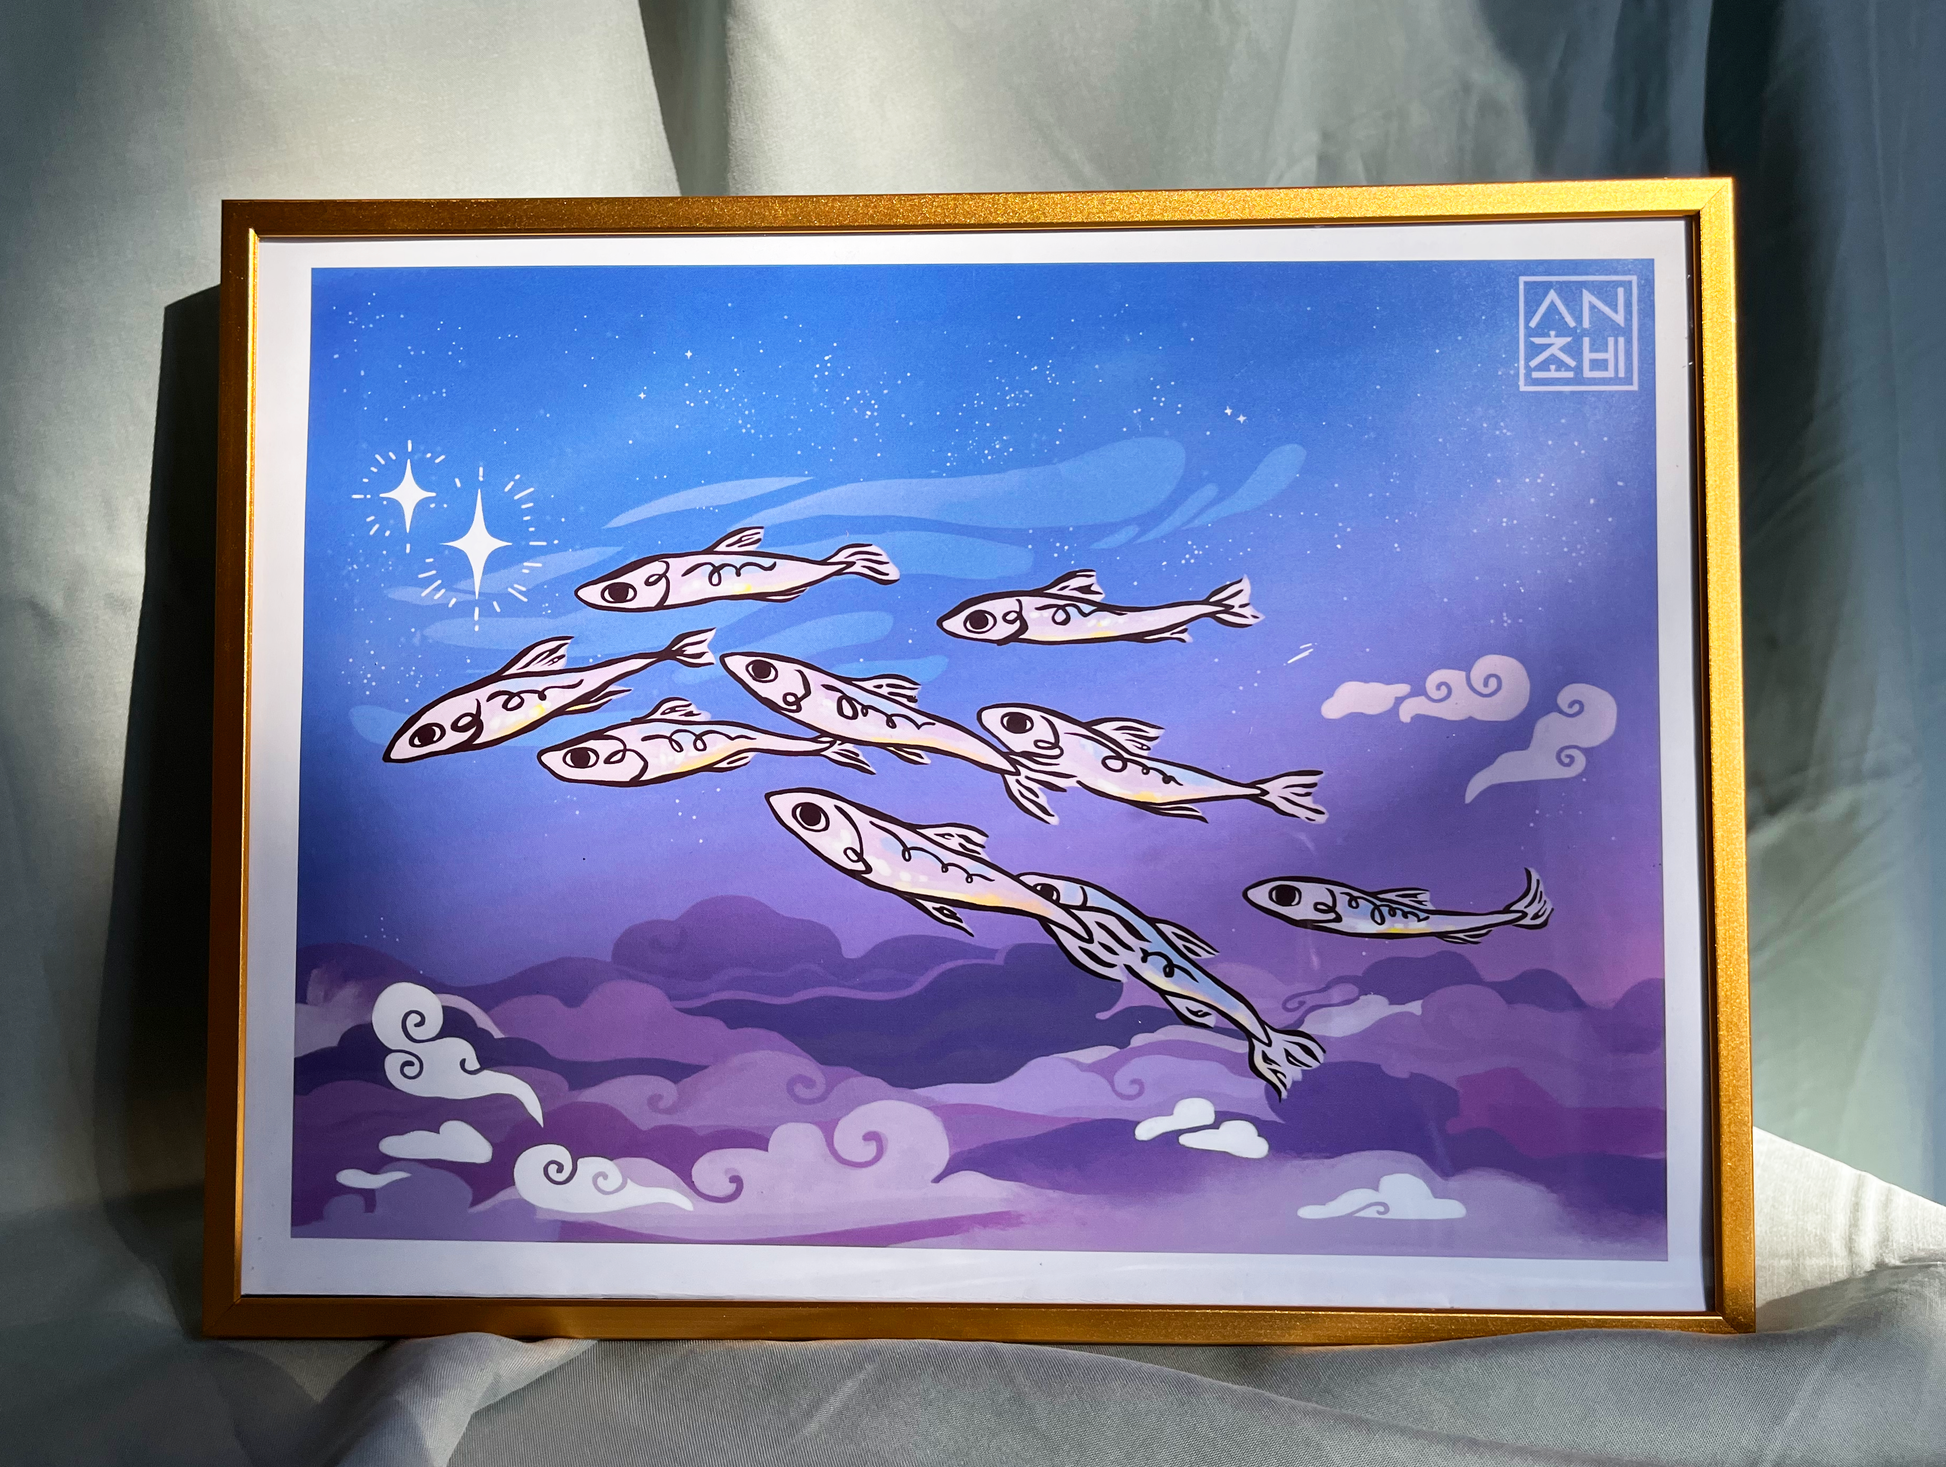 9x12 Gloss Finish Color Art Print in full color for home, apartment, or room decor. A school of anchovies flies together in the evening sky among blue and purple clouds and stars. Anchovy Studio original design by independent artists. Featured here in a gold frame.